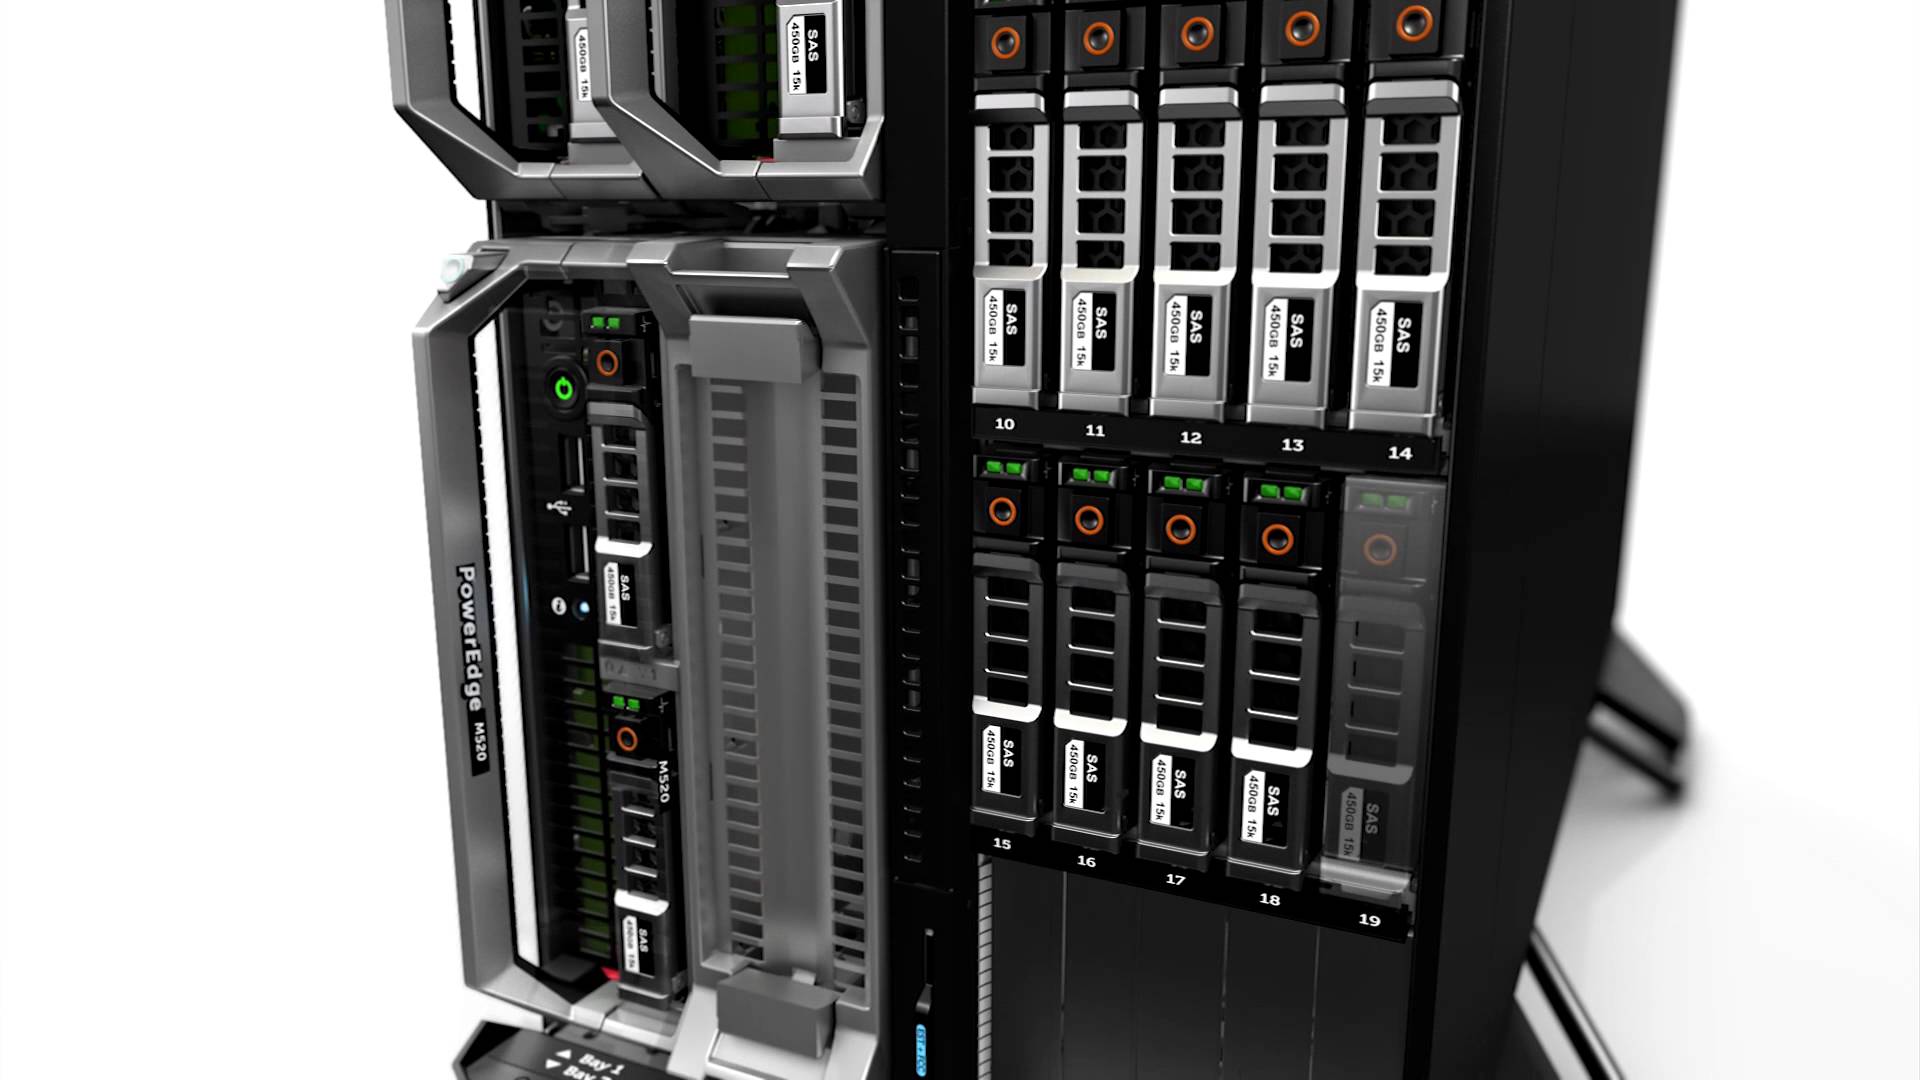 How Superb is Dell's New VRTX Server?